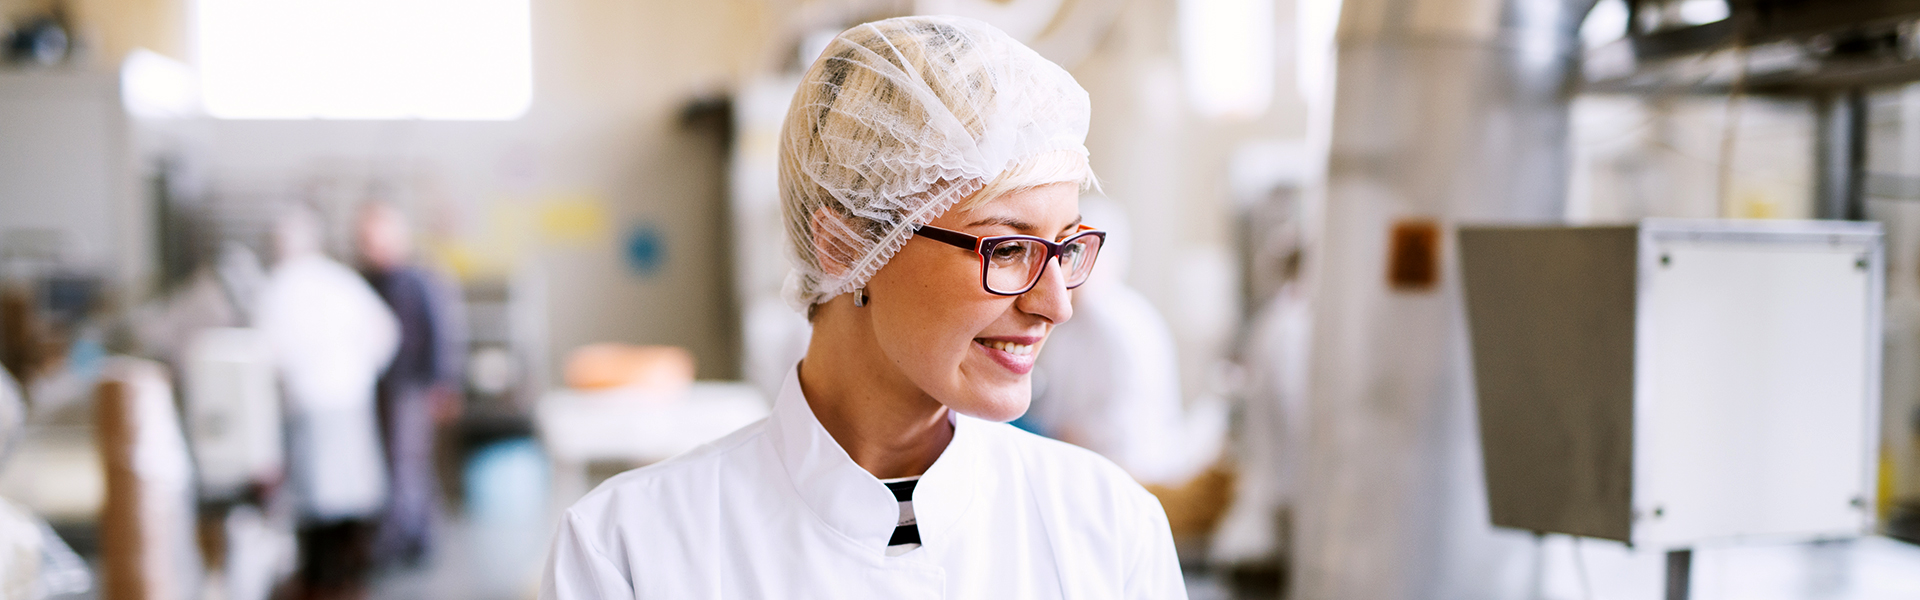 image of a young woman in a food processing plant